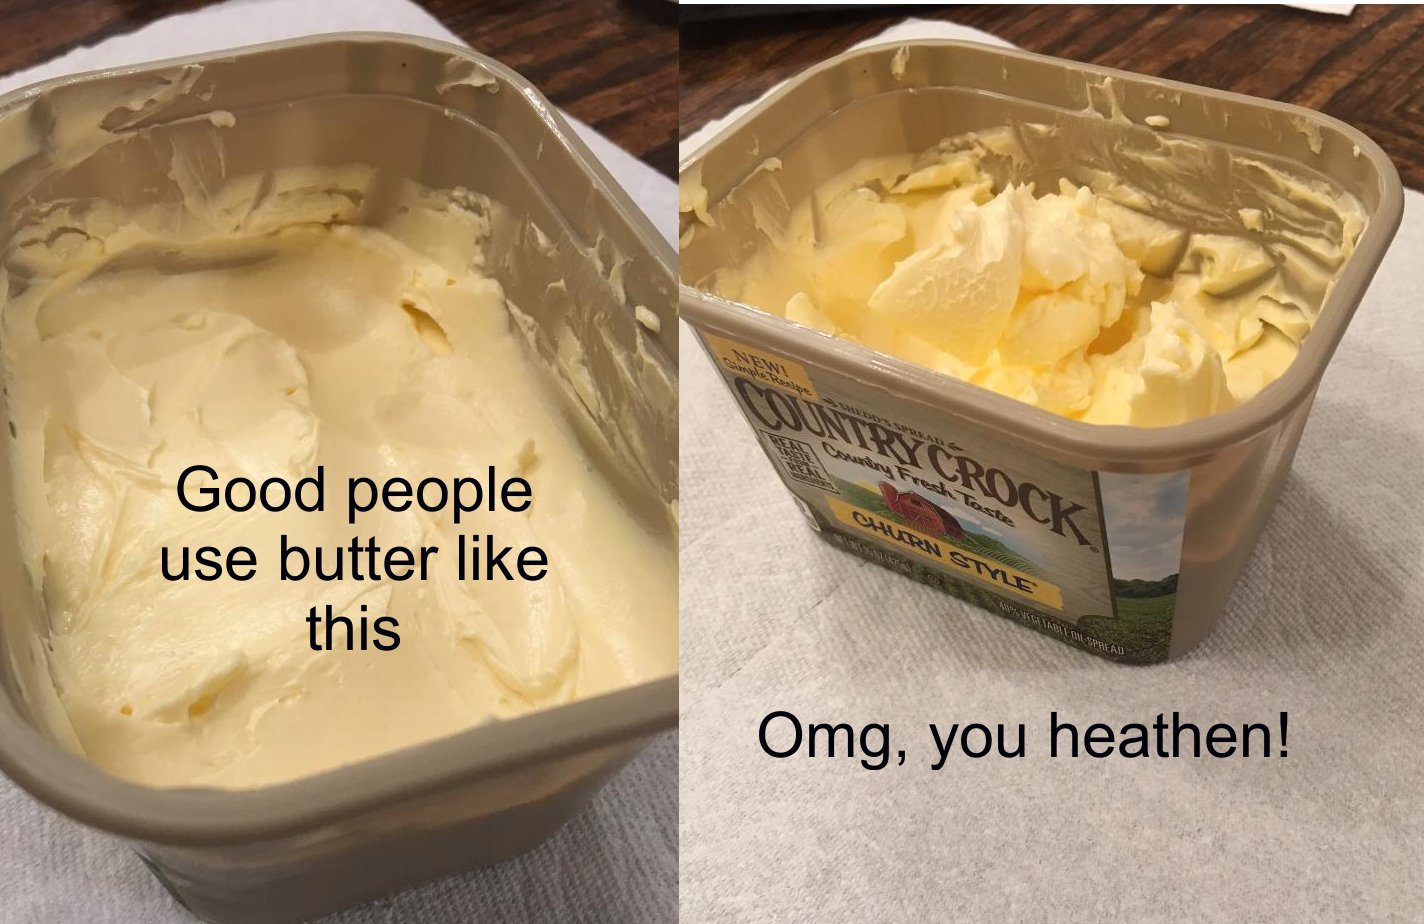 sour cream - Icrock Good people use butter this Omg, you heathen!